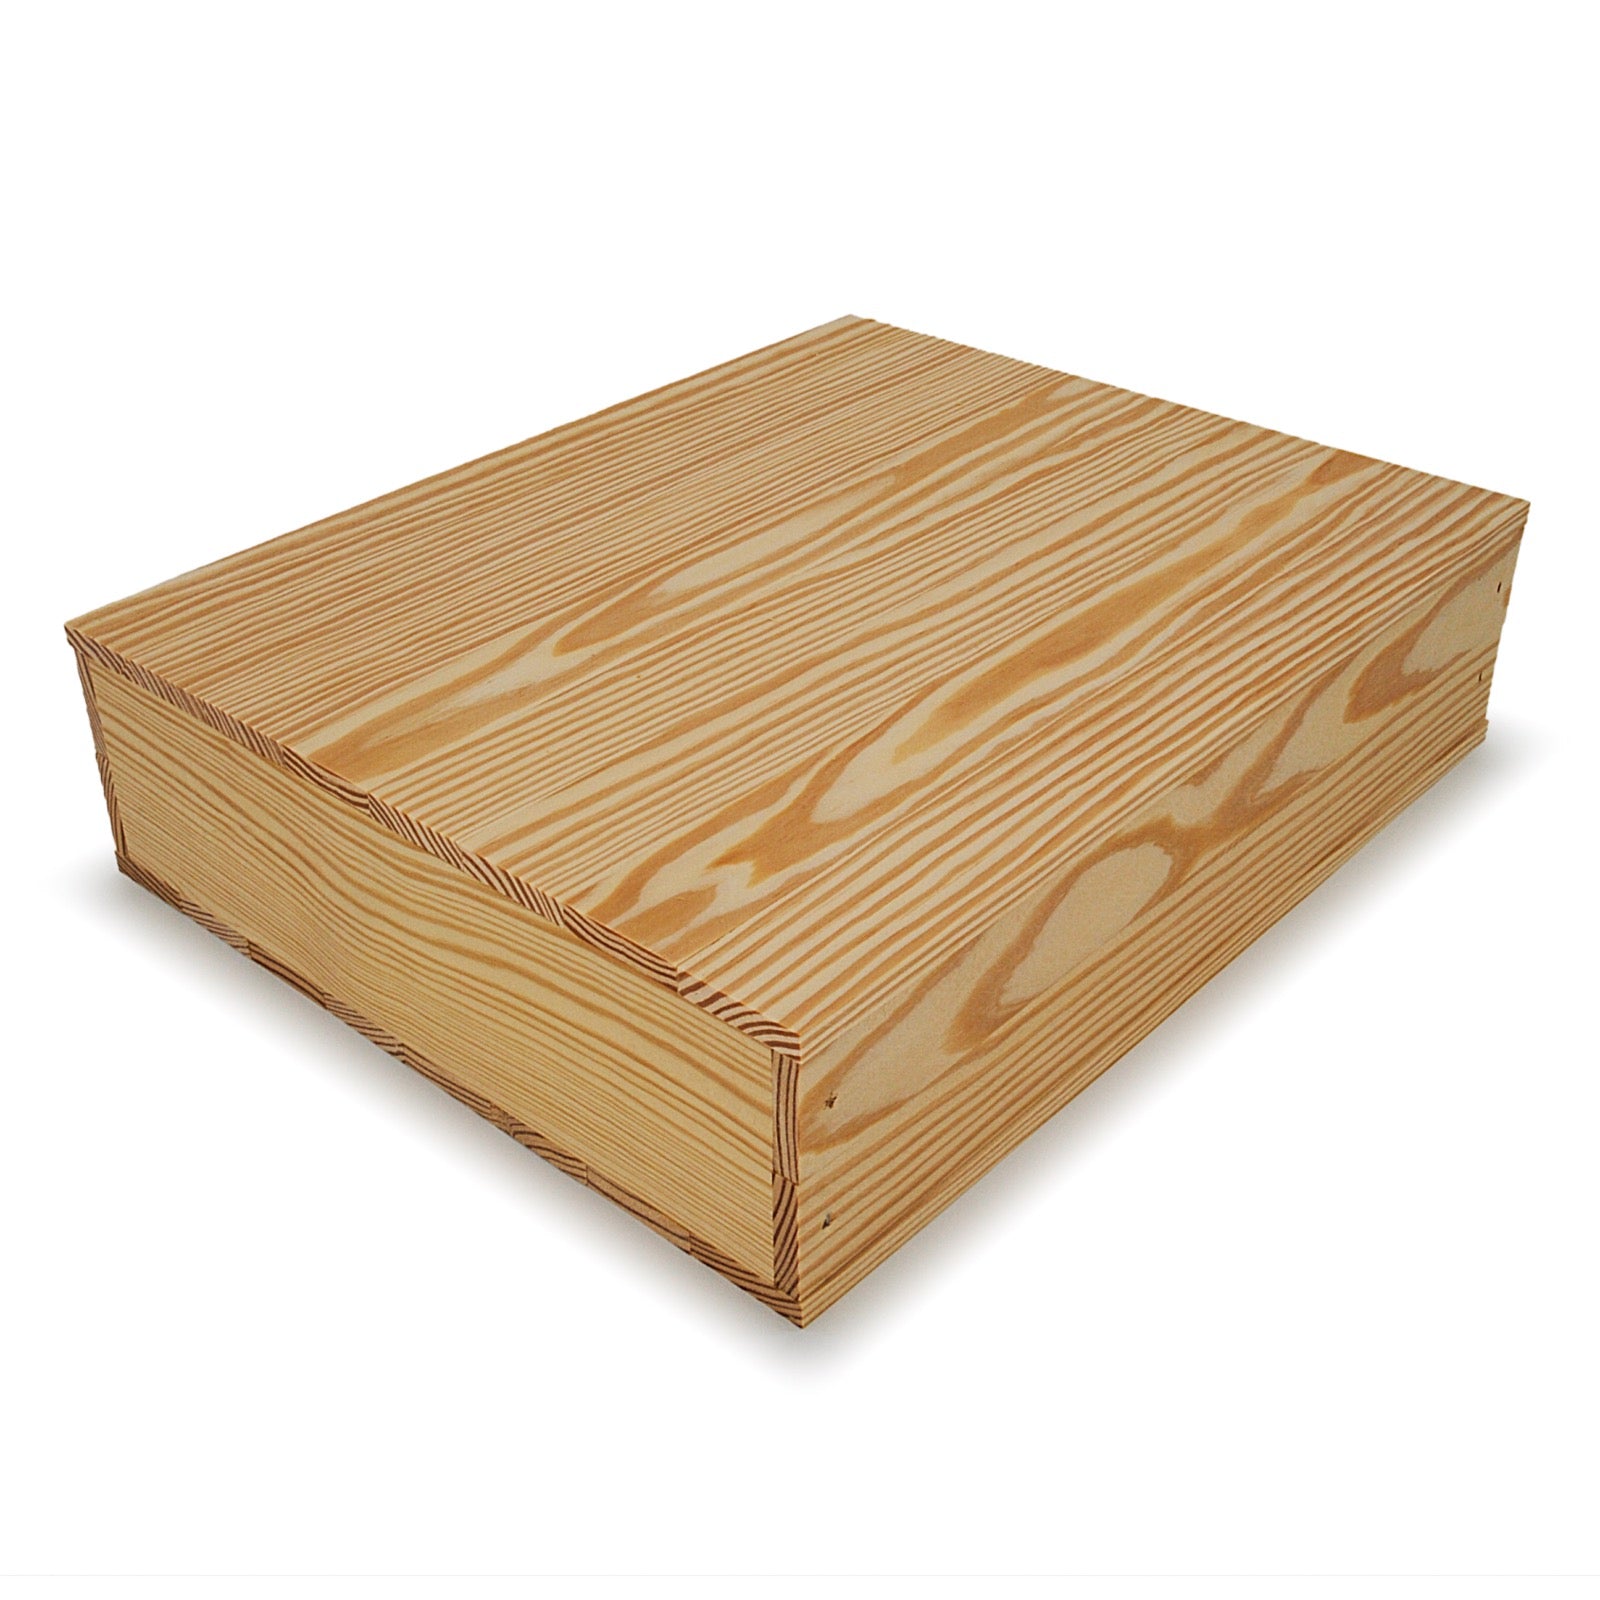 Small wooden crate with lid 16x13.25x3.5, 6-BX-16-13.25-3.5-NX-NW-LL, 12-BX-16-13.25-3.5-NX-NW-LL, 24-BX-16-13.25-3.5-NX-NW-LL, 48-BX-16-13.25-3.5-NX-NW-LL, 96-BX-16-13.25-3.5-NX-NW-LL